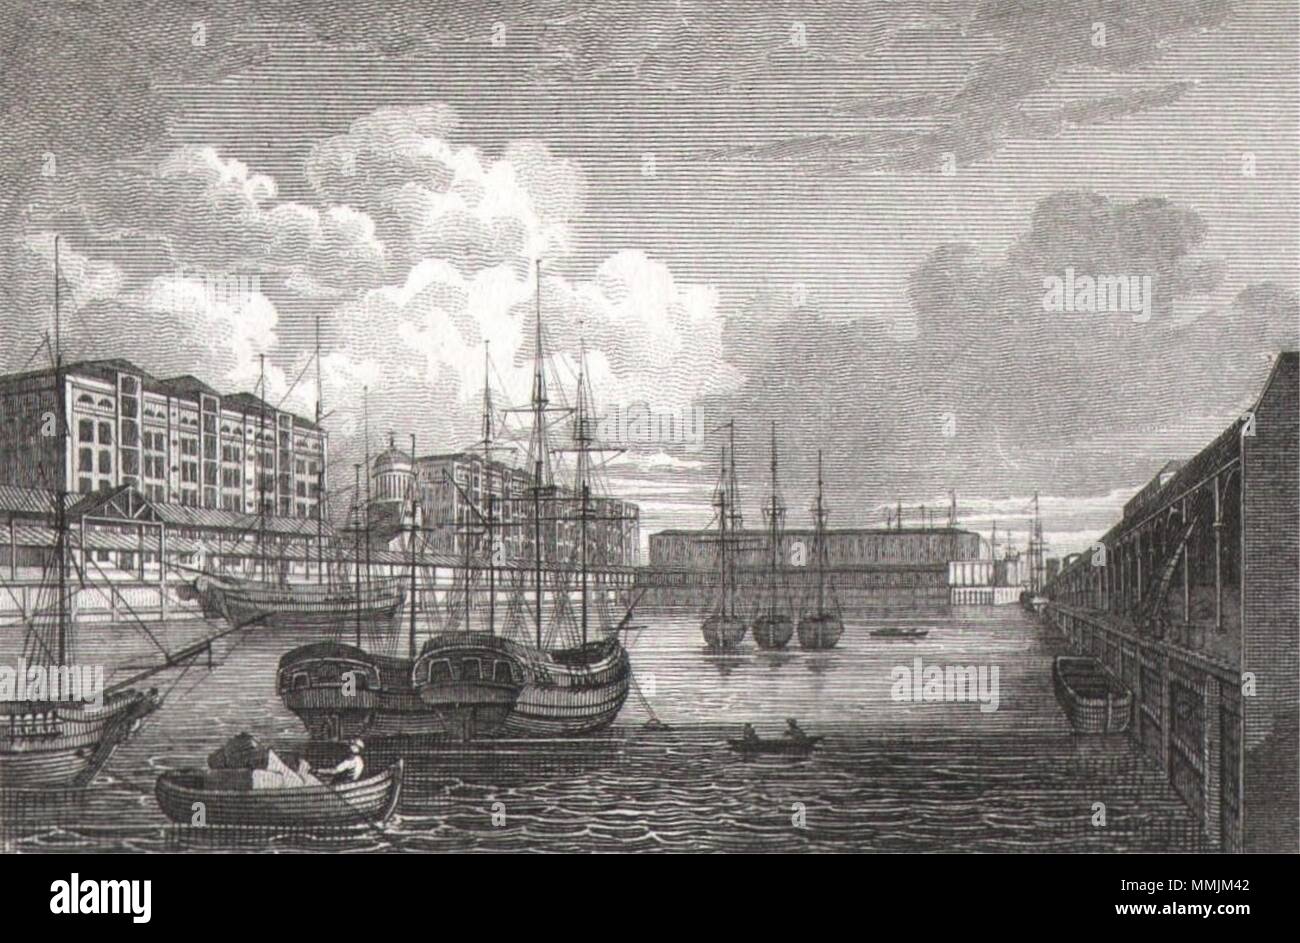 West India Import Dock, London. Canary Wharf. Antique engraved print 1817 Stock Photo